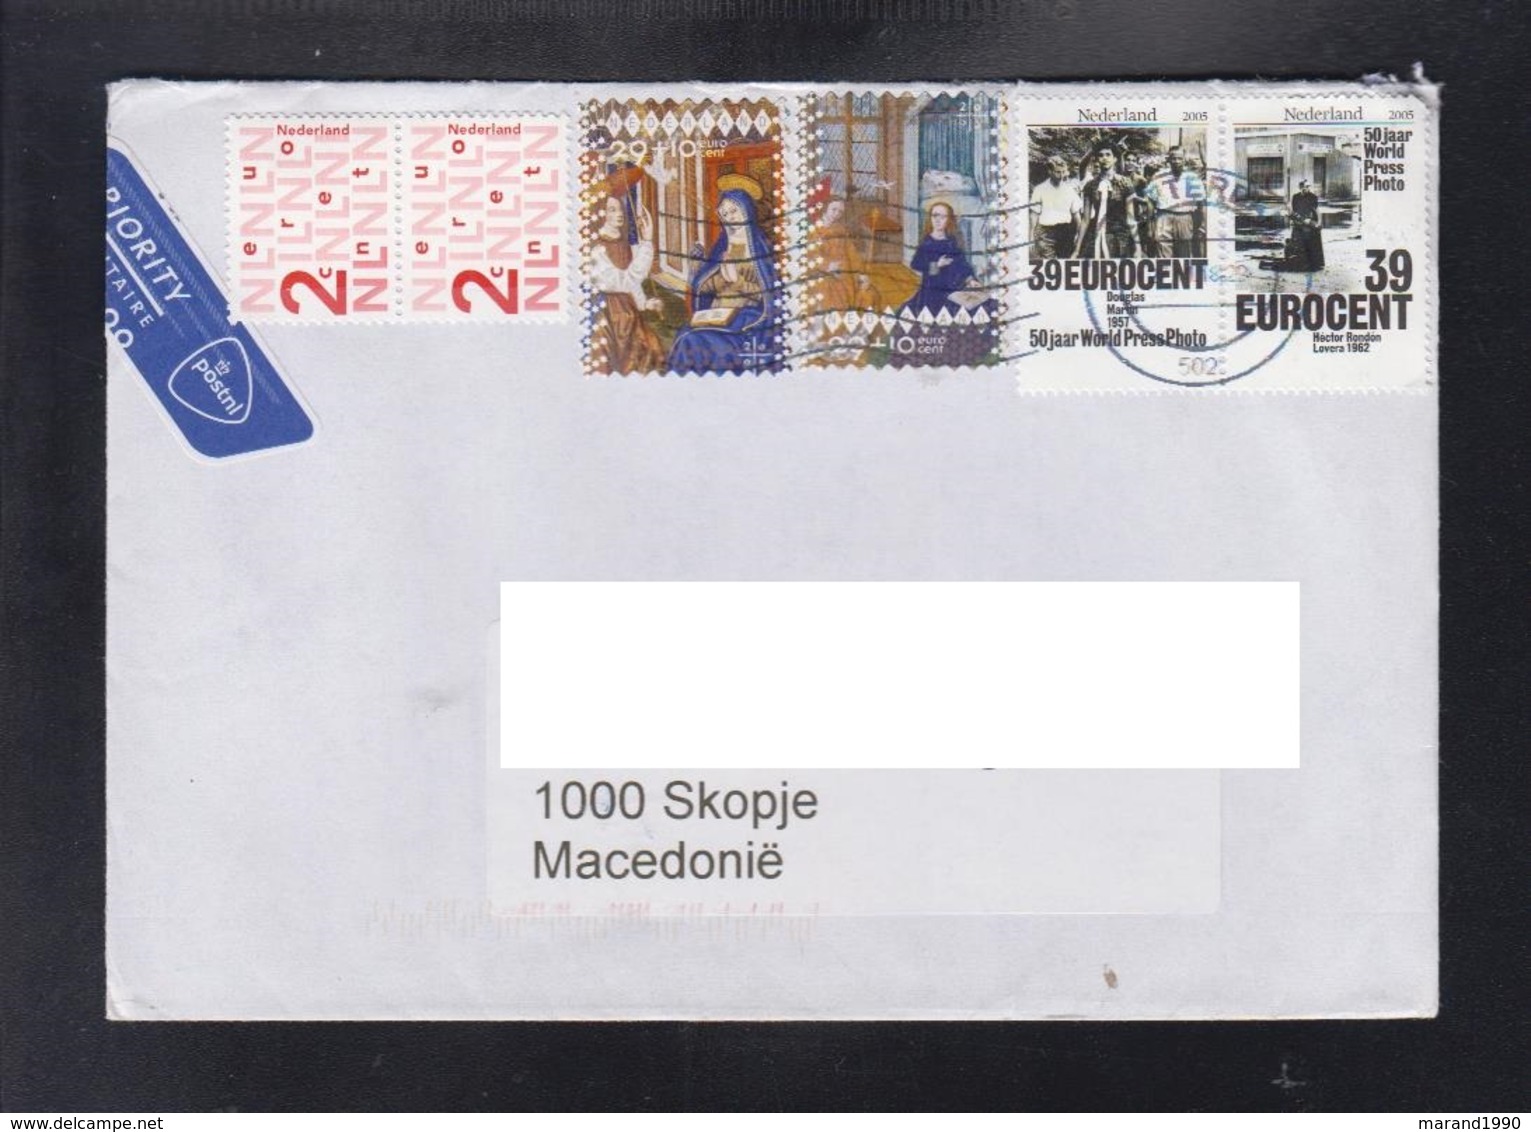 NETHERLAND, COVER, RELIGION / REPUBLIC OF MACEDONIA ** - Unclassified